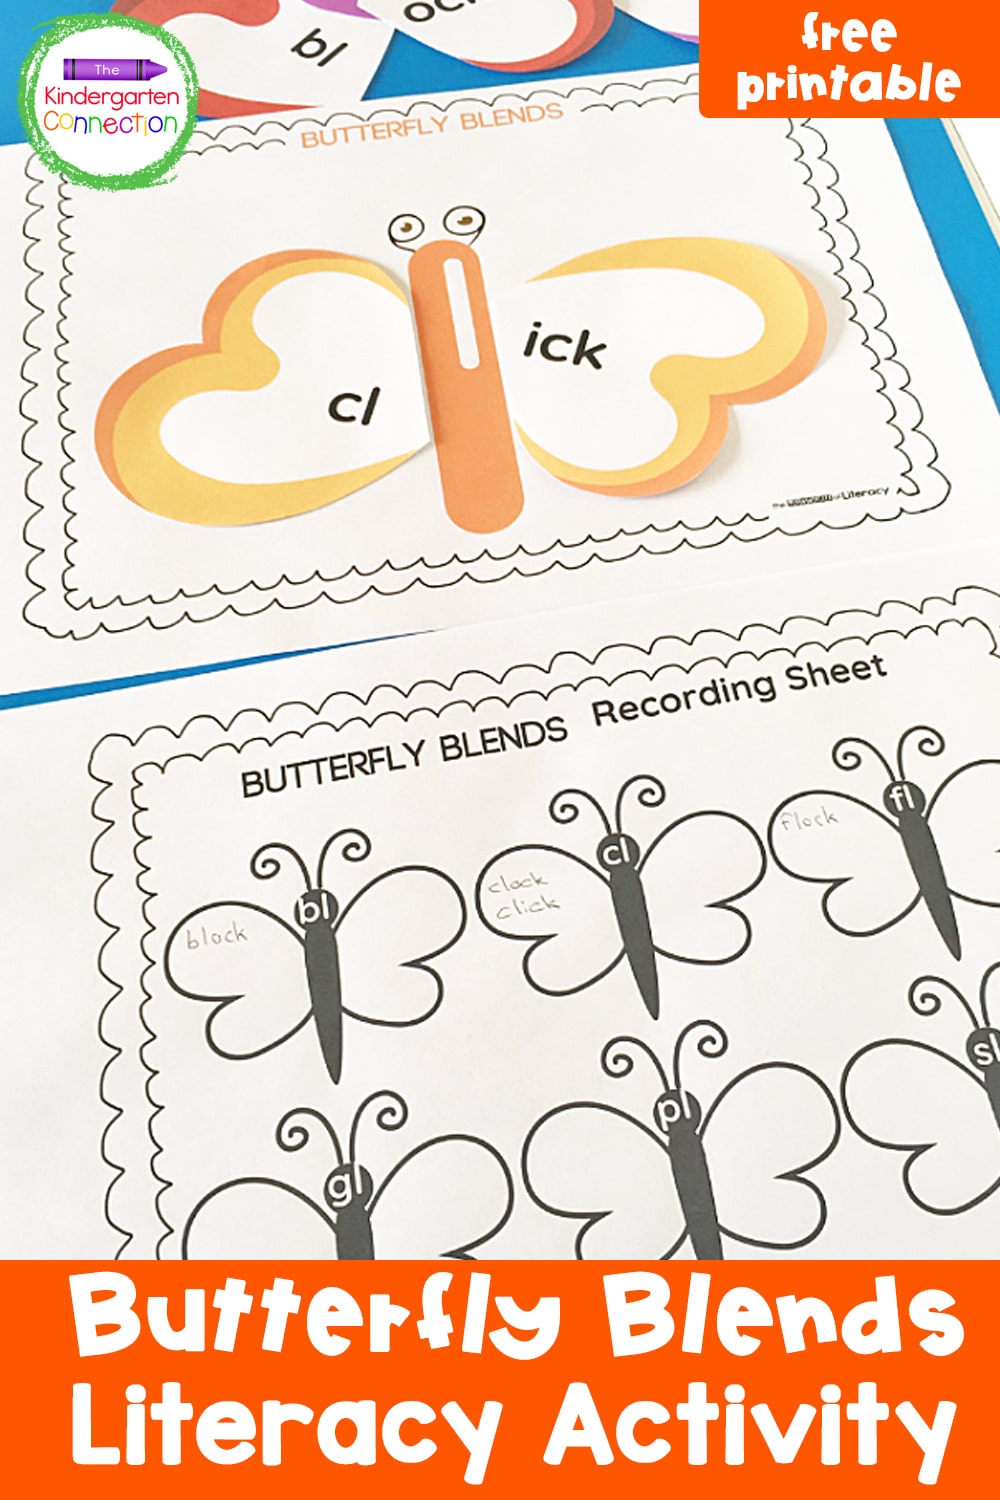 This Butterfly Blends Activity has children practicing "l" blends in a fun, hands-on way this spring! Our FREE printable includes a recording sheet too!